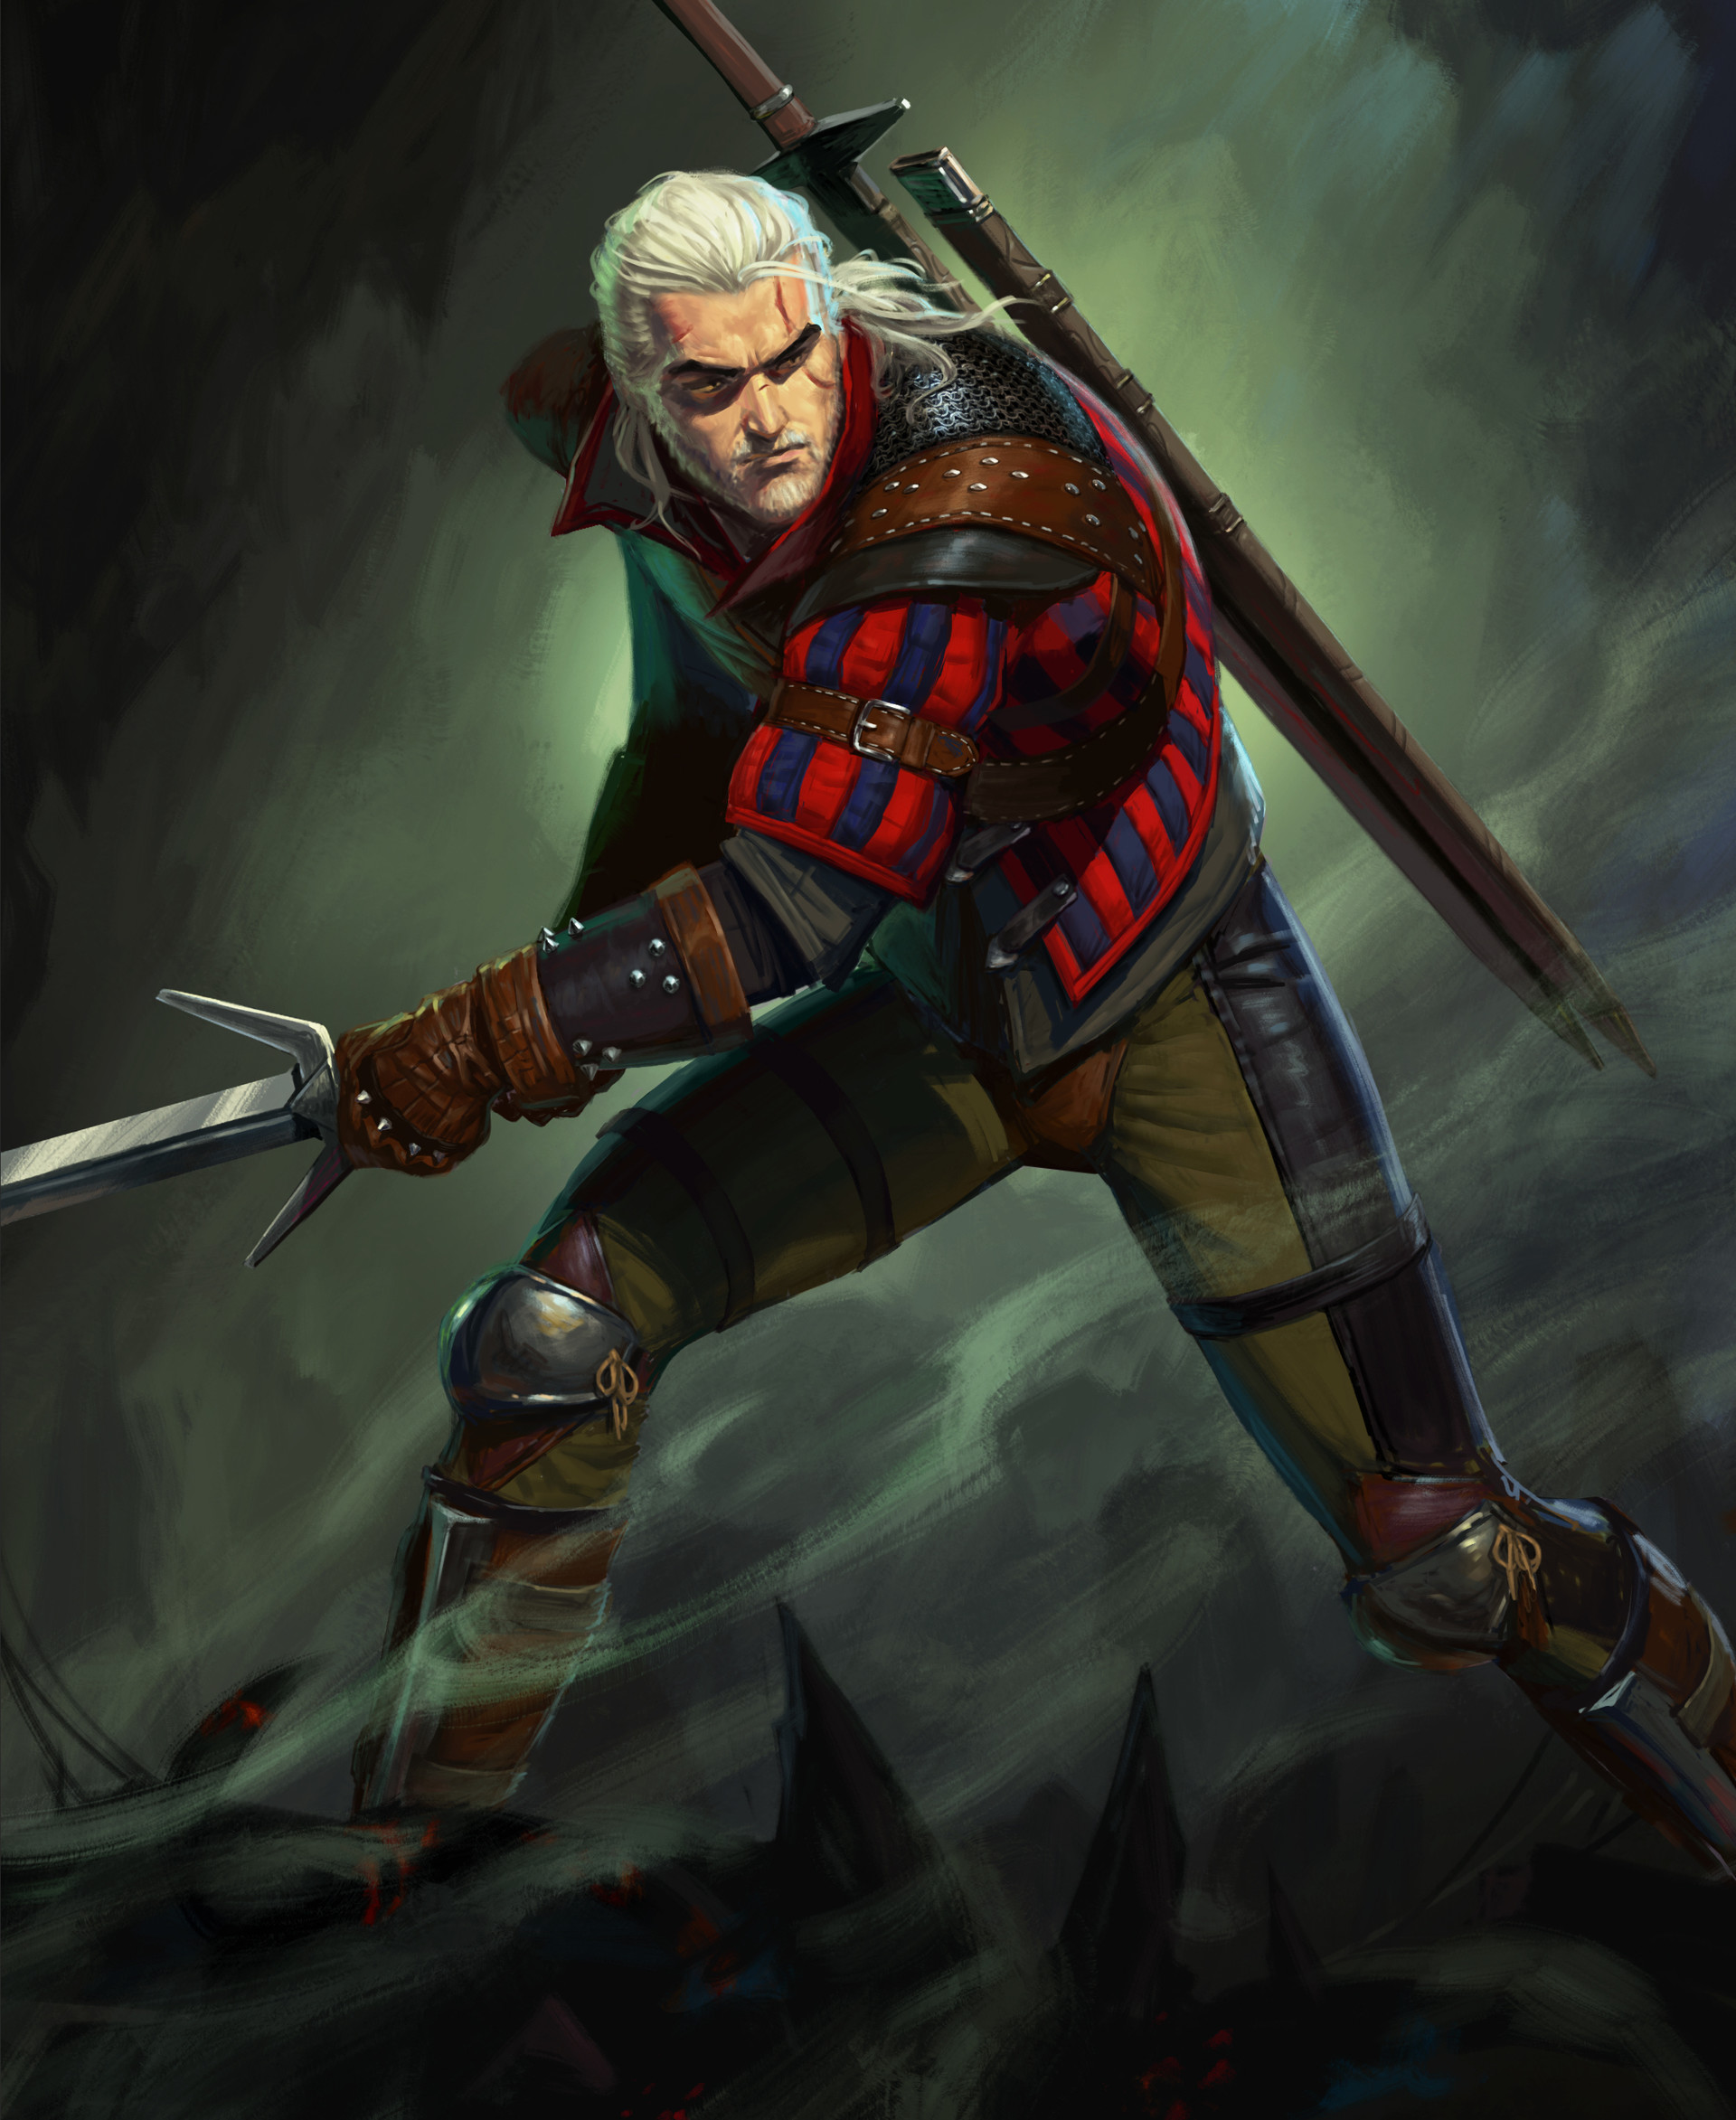 The Witcher 3: Wild Hunt Art by Nikita Volobuev